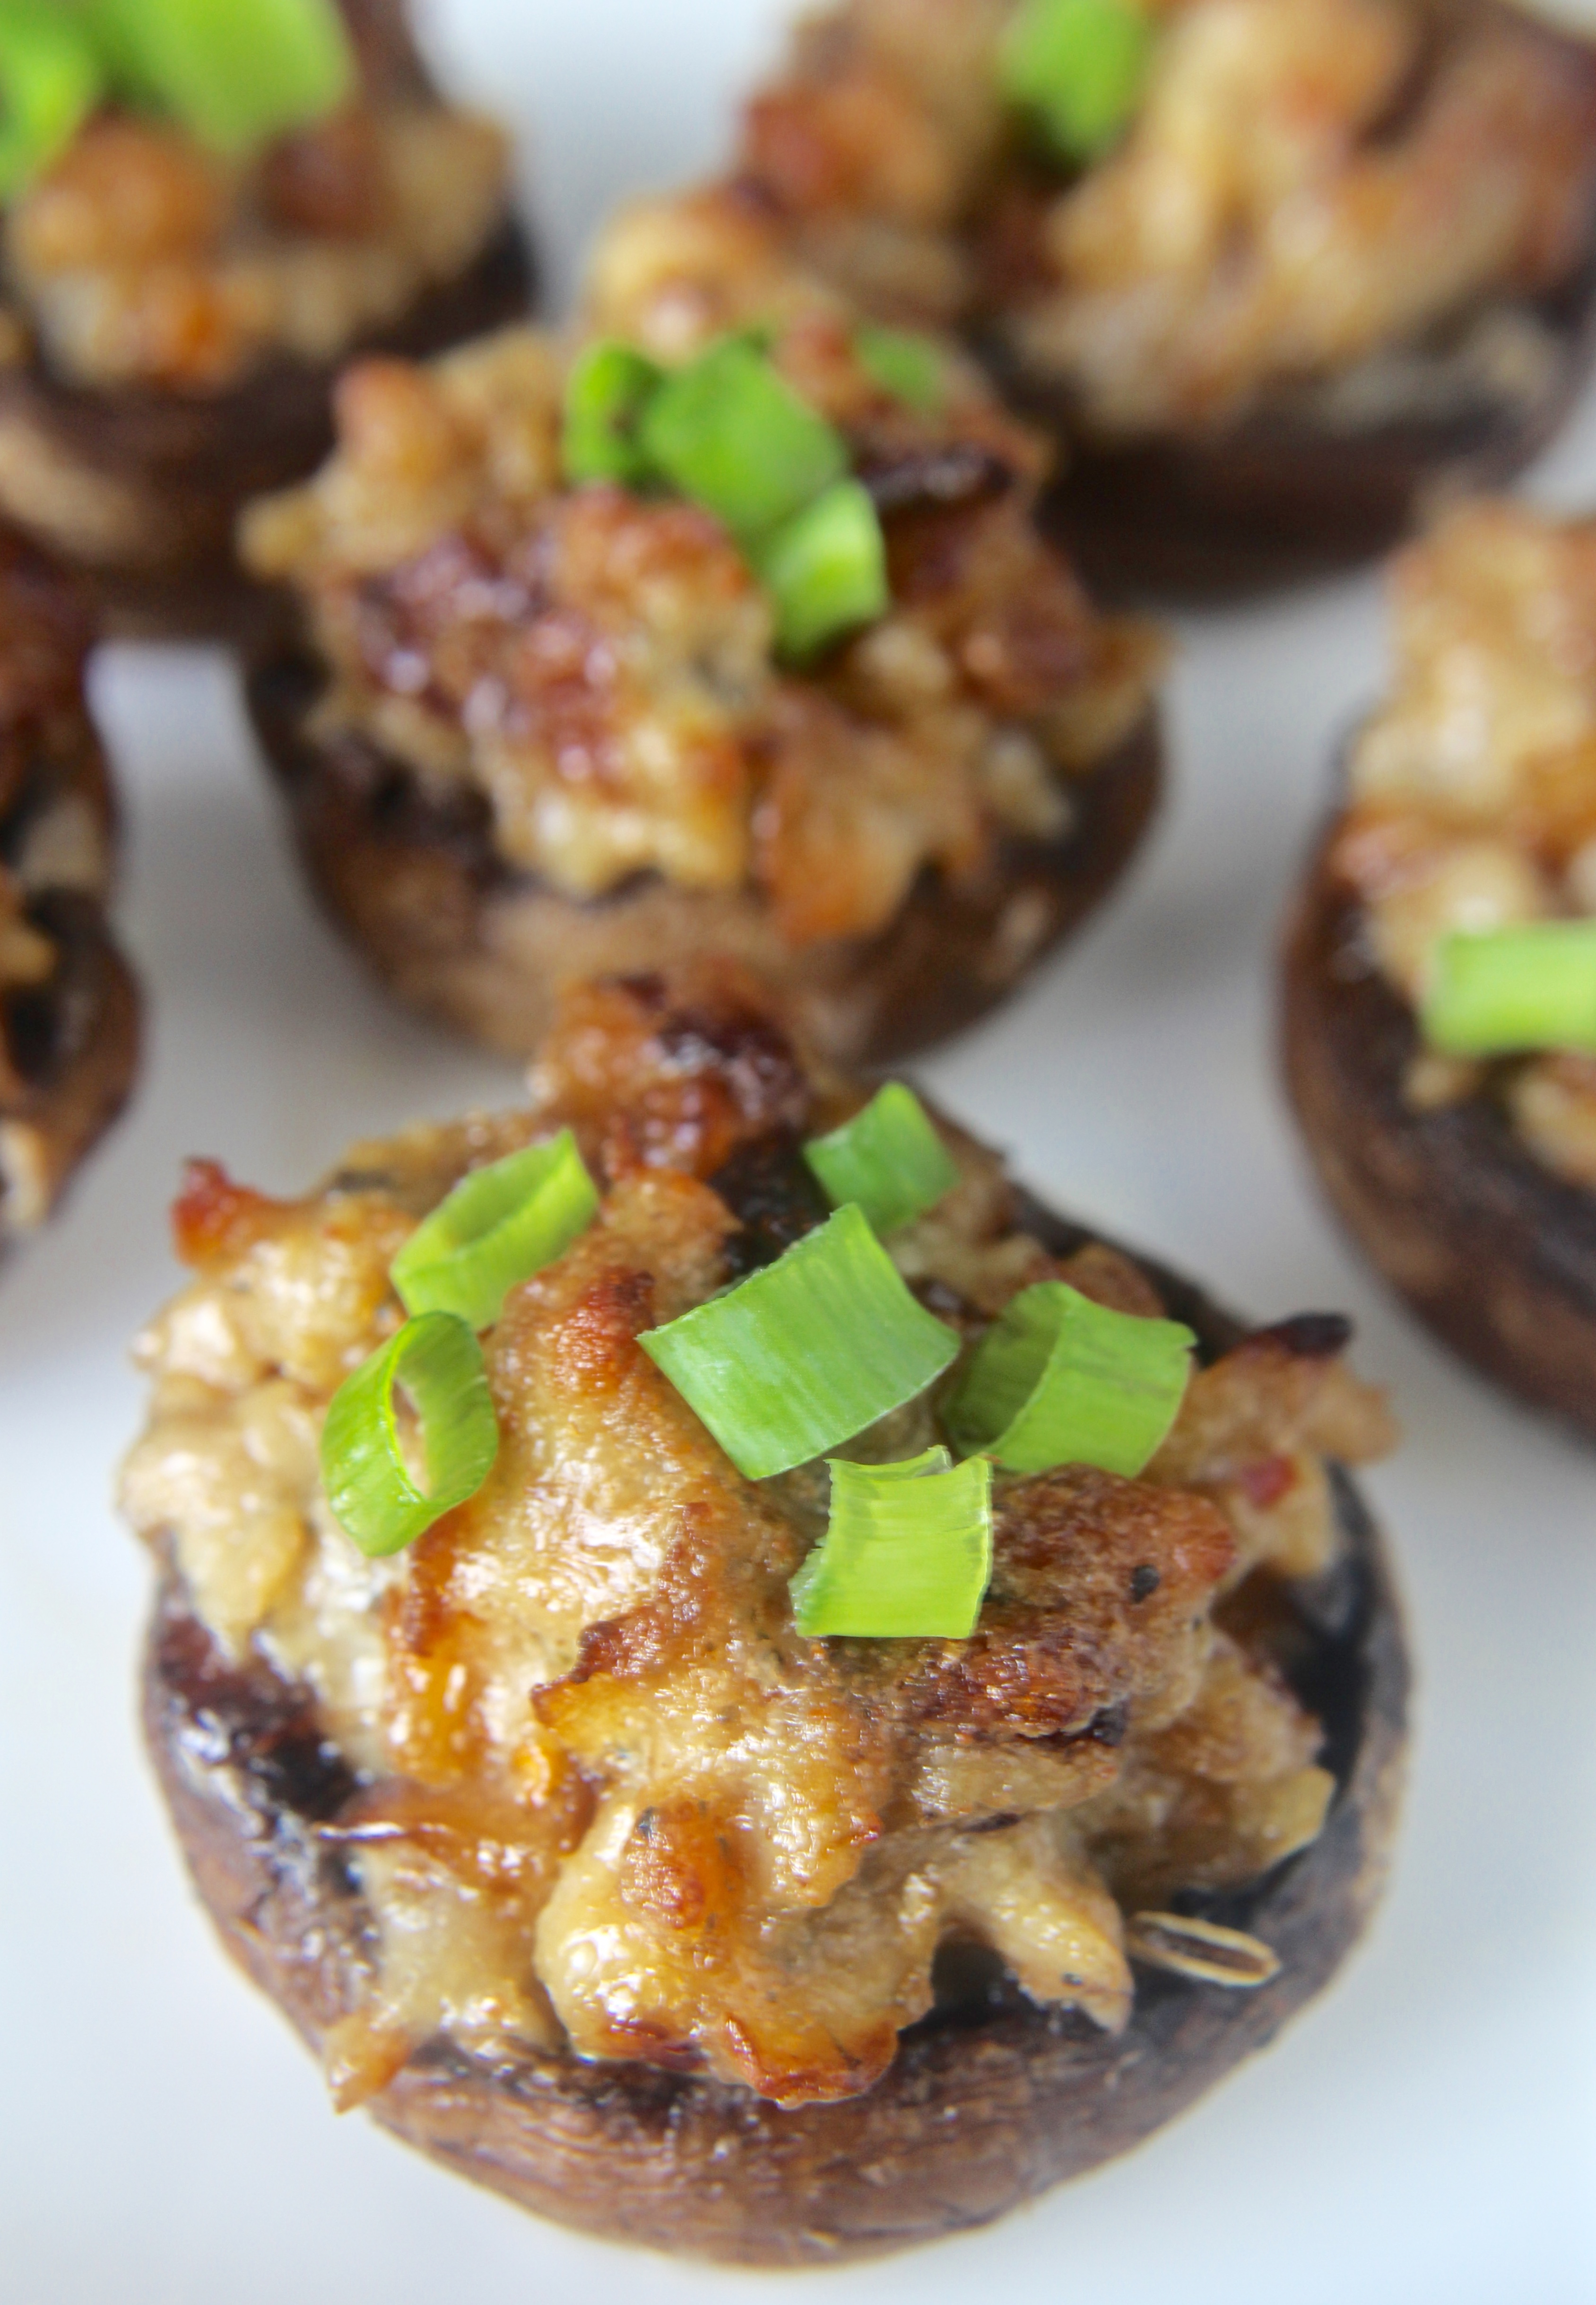 Chipotle Stuffed Mushrooms - Jay's Baking Me Crazy